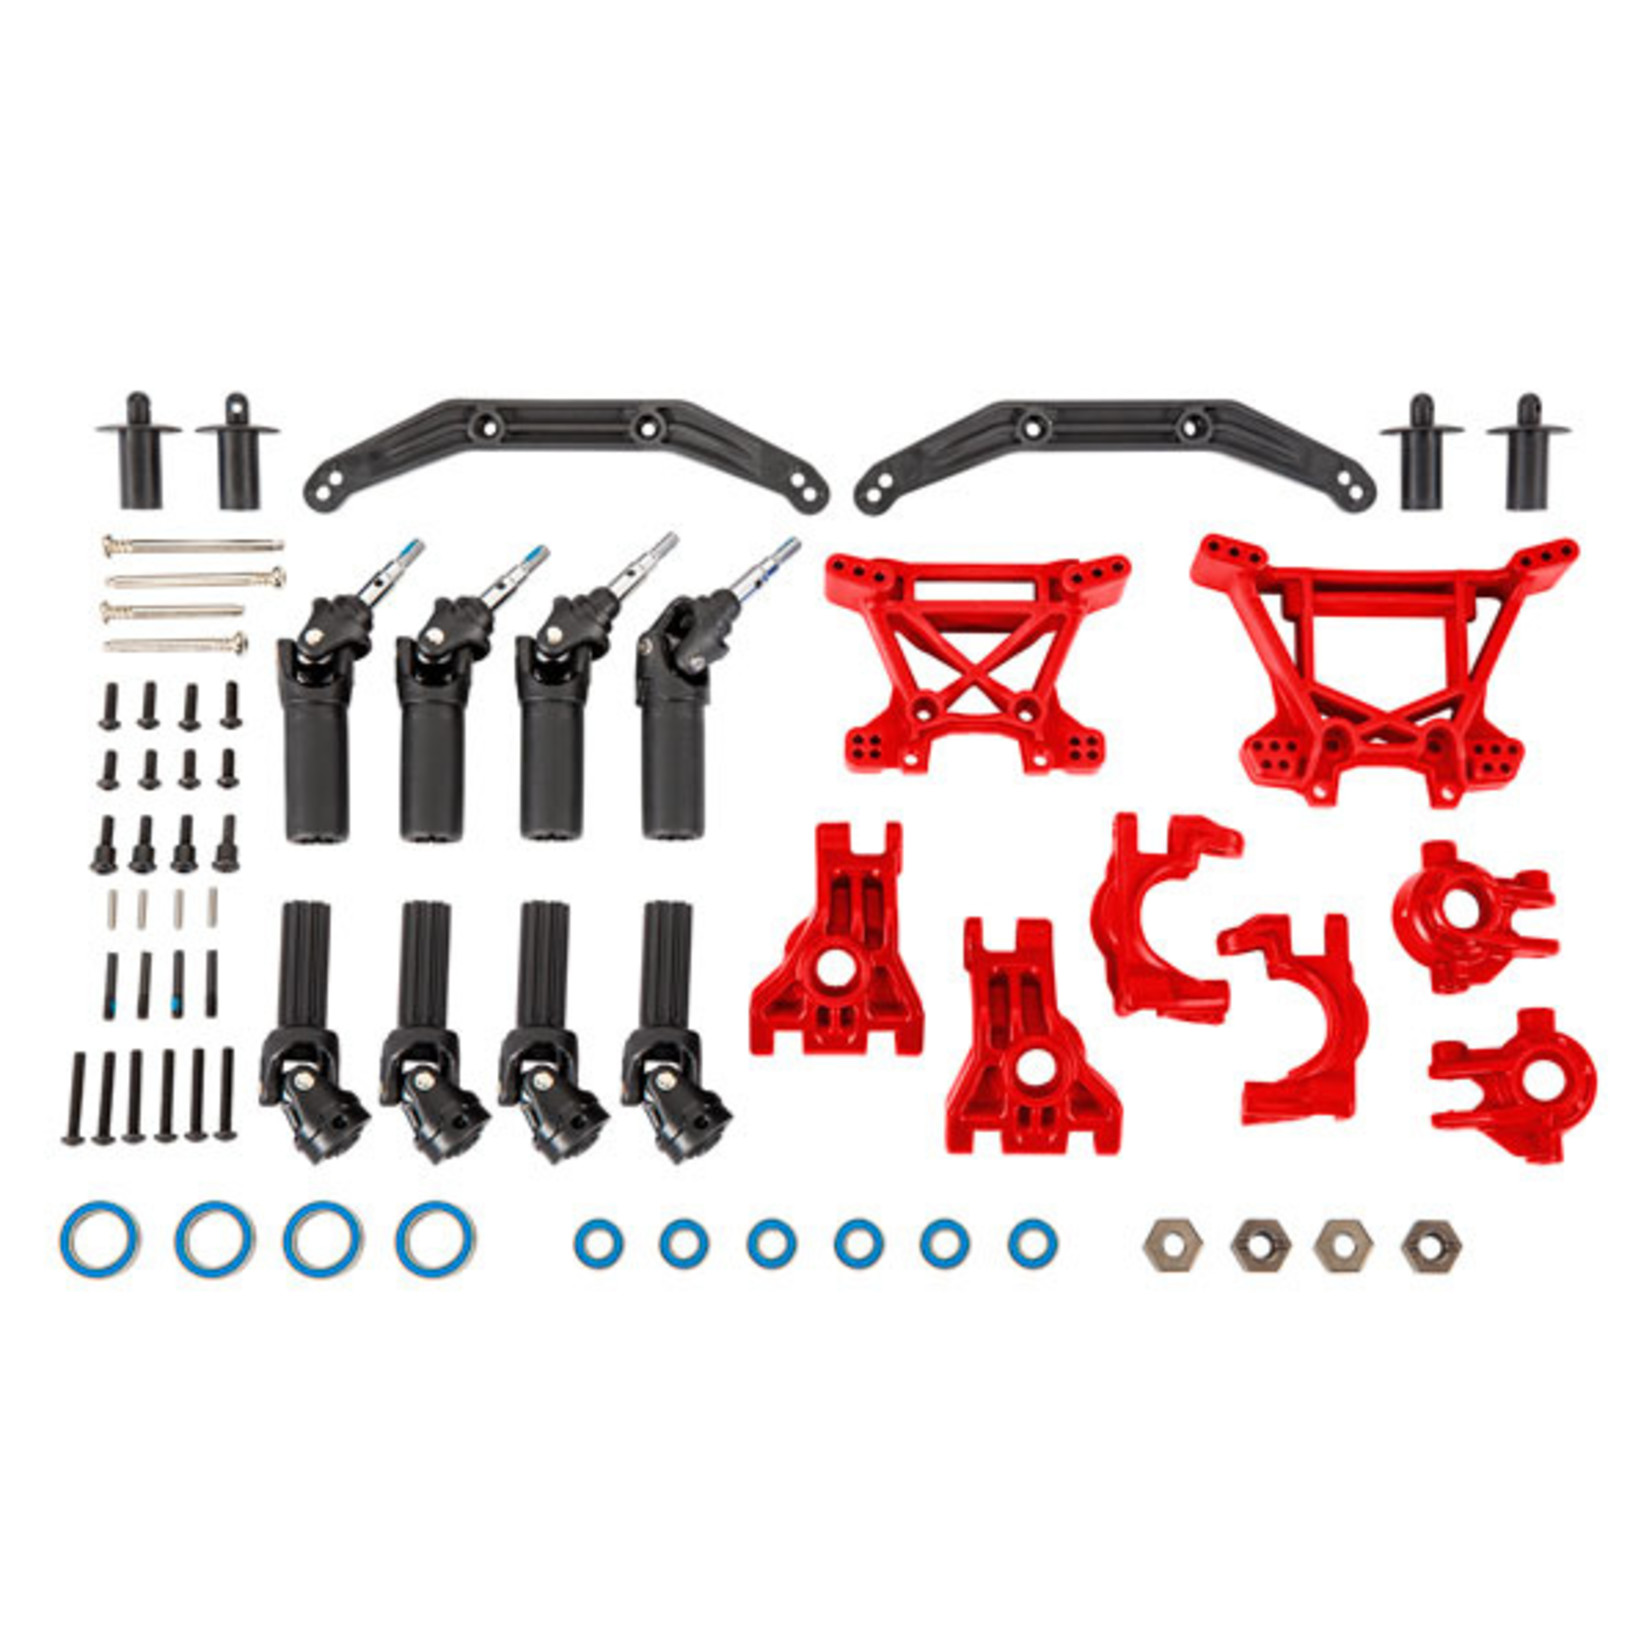 Traxxas 9080R - Outer Driveline & Suspension Upgrade Kit,